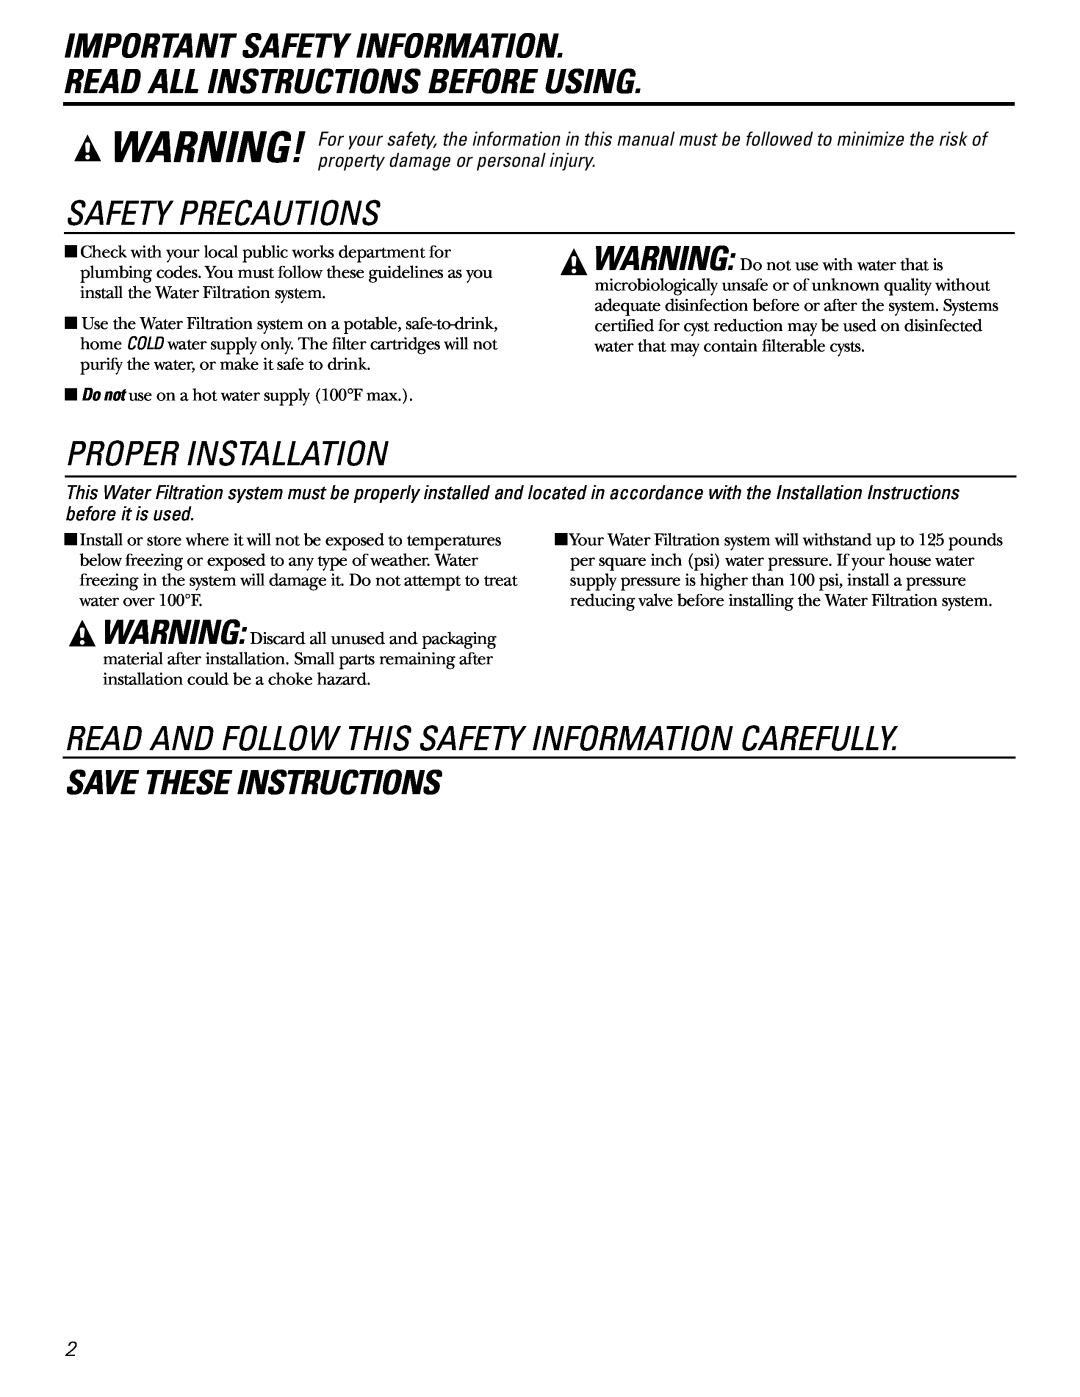 GE GXSL03C Important Safety Information Read All Instructions Before Using, Safety Precautions, Proper Installation 